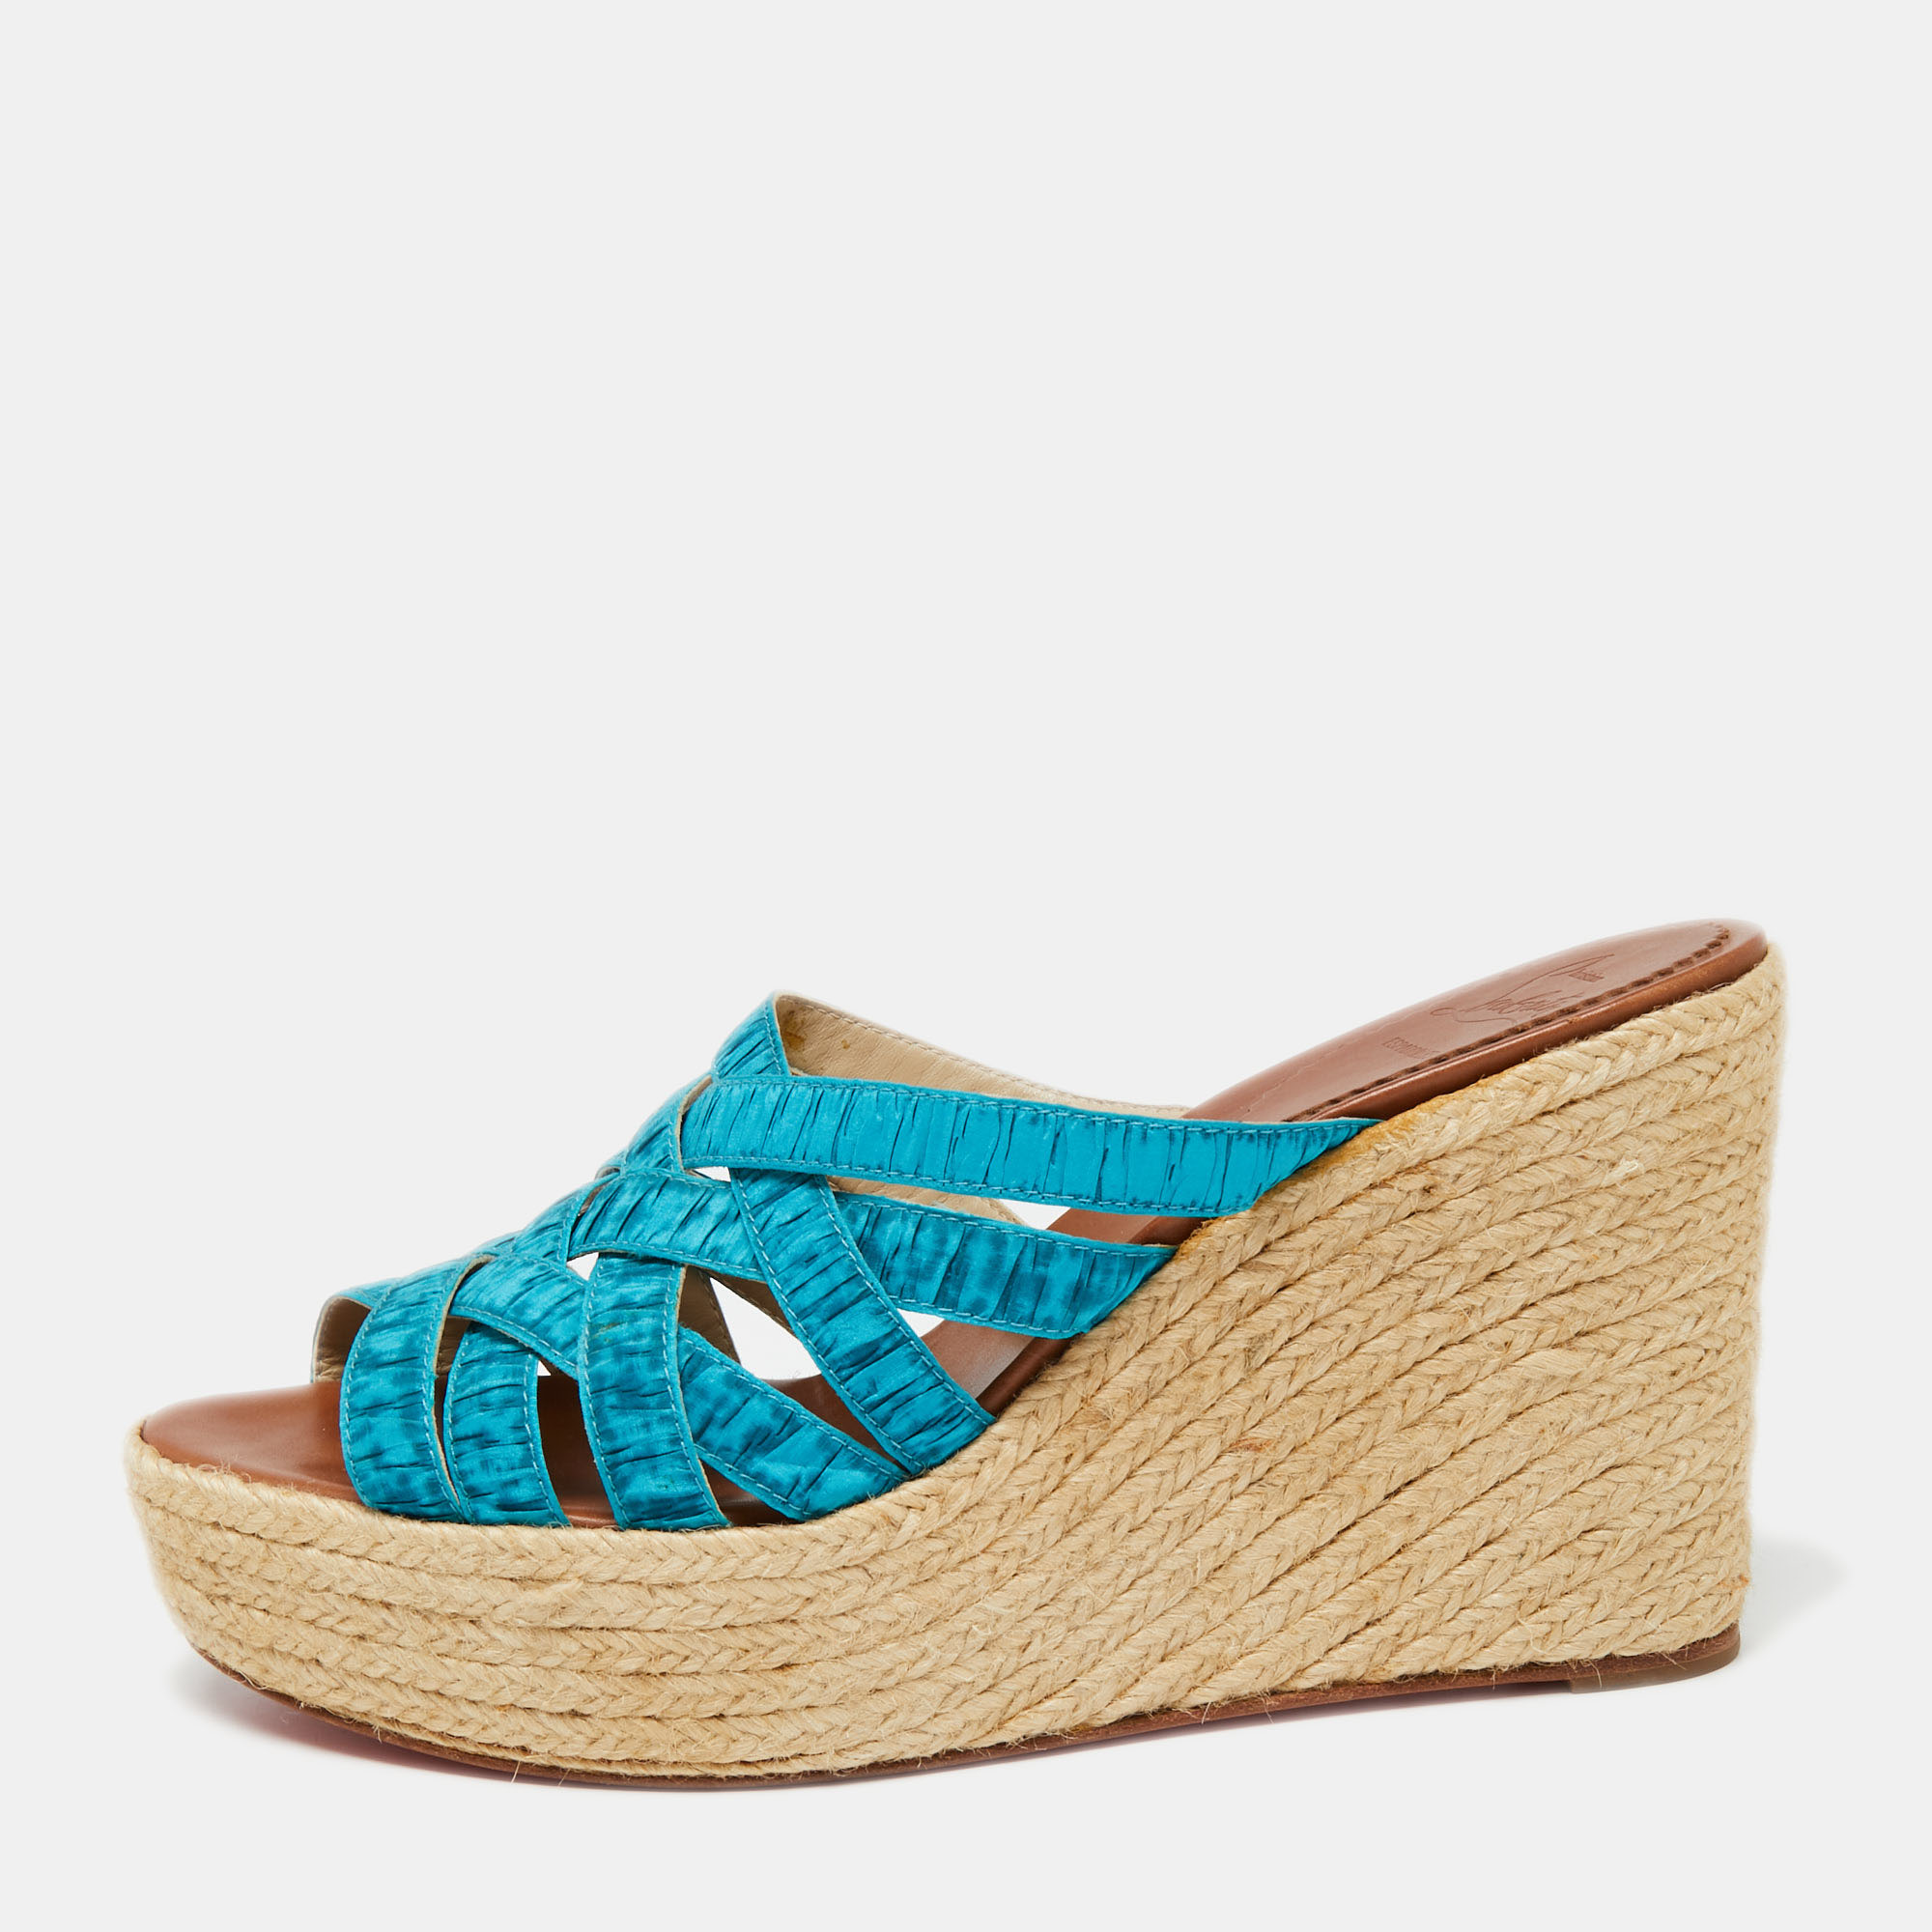 Christian Louboutin brings a perfect pair for the summer season These sandals come with a blue strappy upper that will frame your feet in the most elegant way. The espadrille wedge heels are supported by platforms for the comfort of your feet.